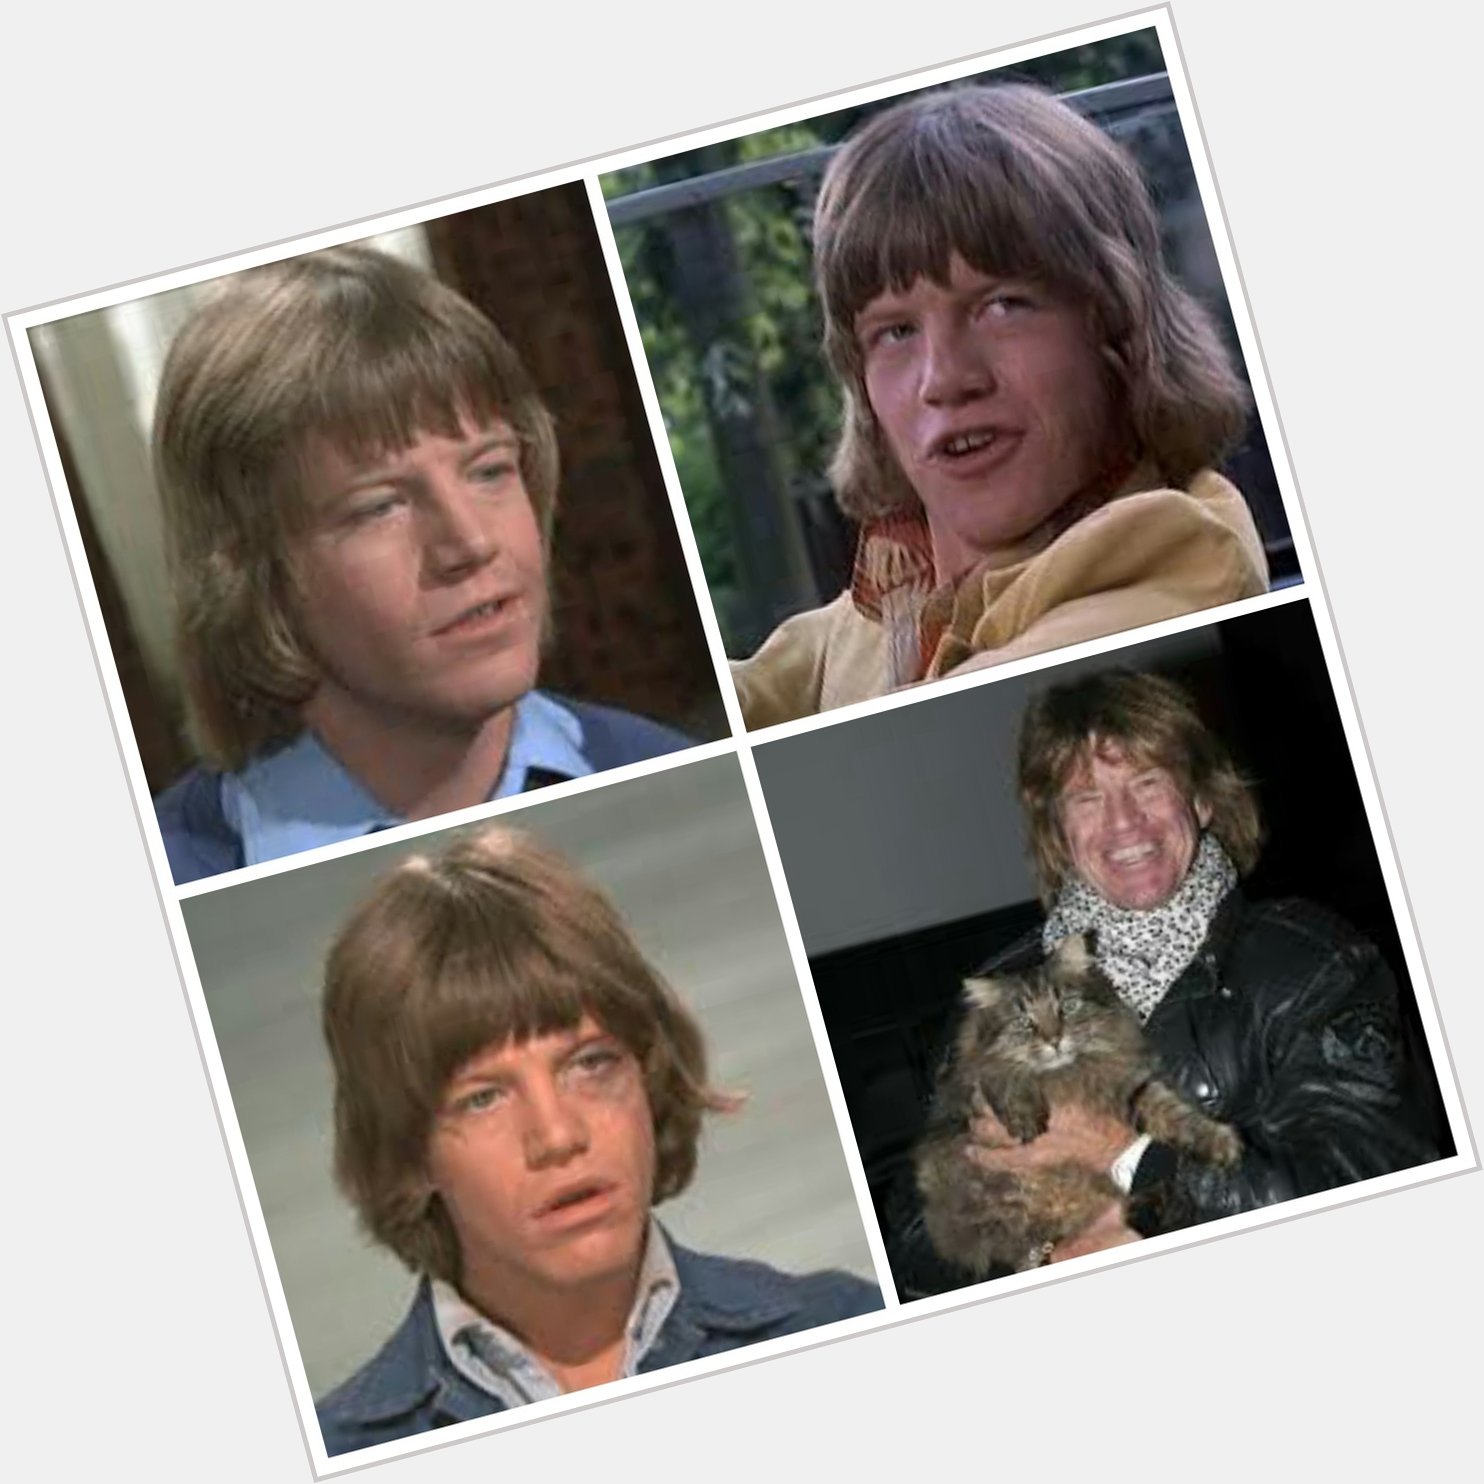 Robin Askwith is 67 today, Happy Birthday Robin 